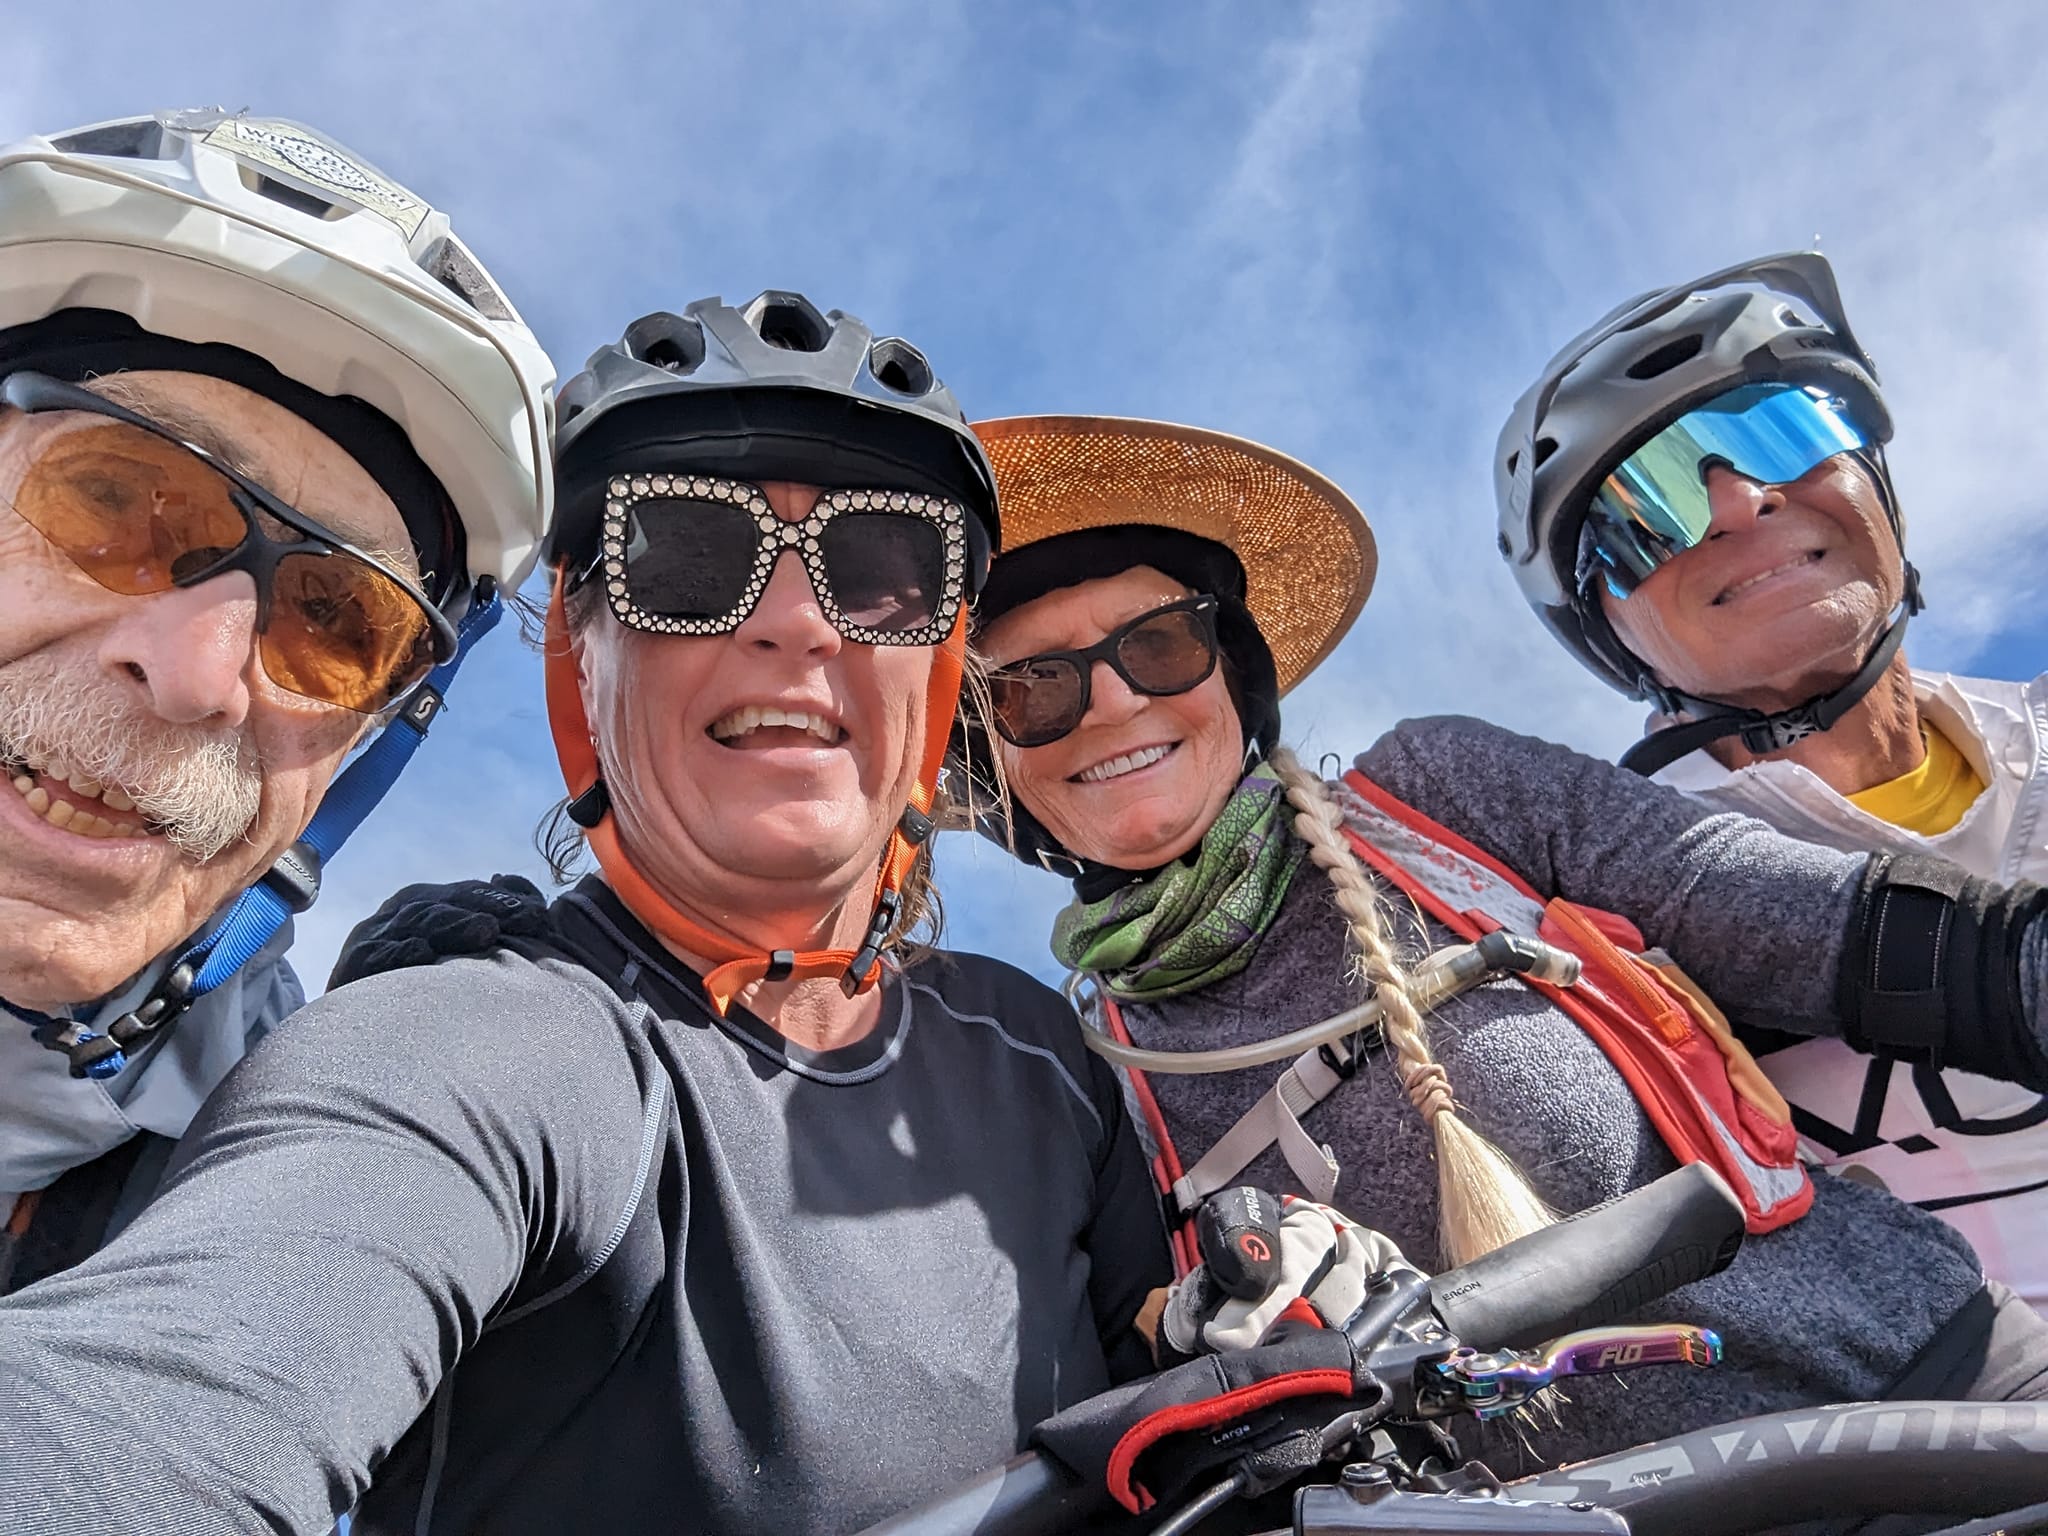 Laurel Darren, second from the left, poses with multiple generations during one of the Wild Bunch's Phoenix mountain bike tours. The variety of people, backgrounds and trails keeps the daily challenge fresh and new for the Phoenix adventure tours owner.